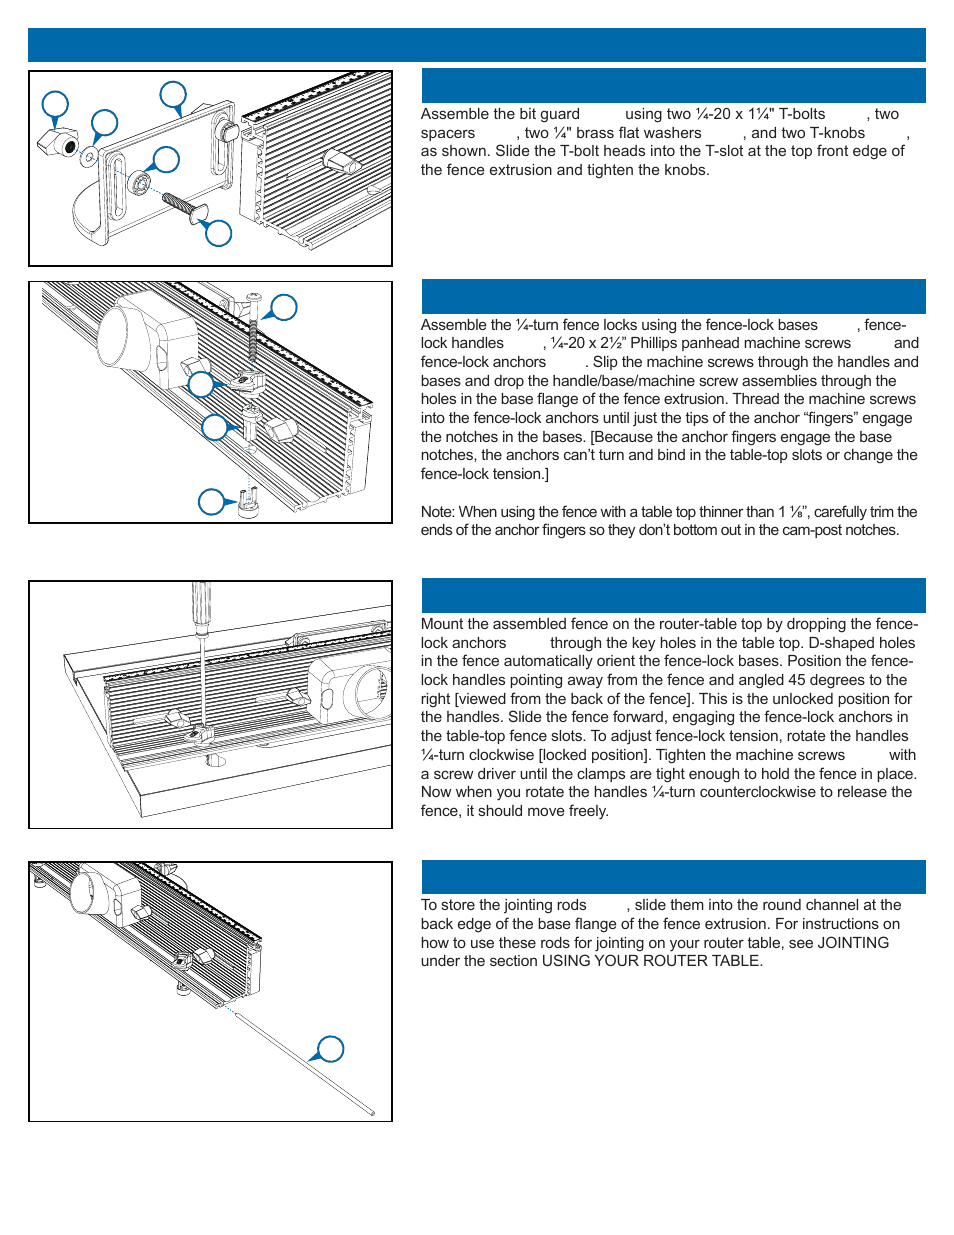 Benchtop router table assembly instructions | Kreg PRS2100 Precision Benchtop Router Table User Manual | Page 8 / 28